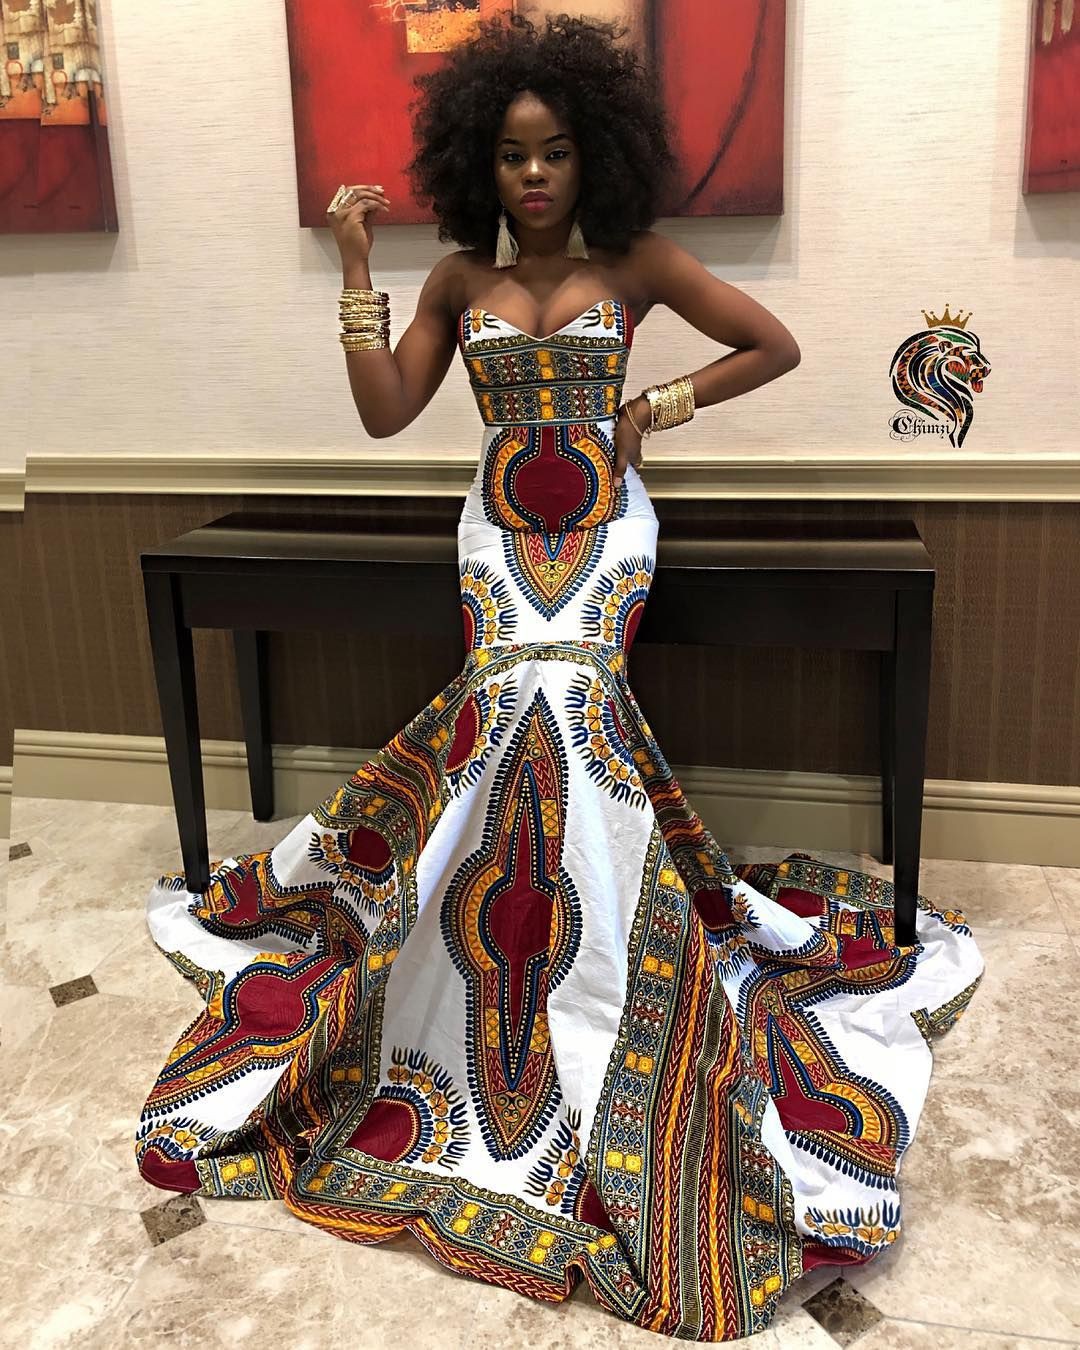 High School Prom African Prom Dress Black Girls Prom Outfits